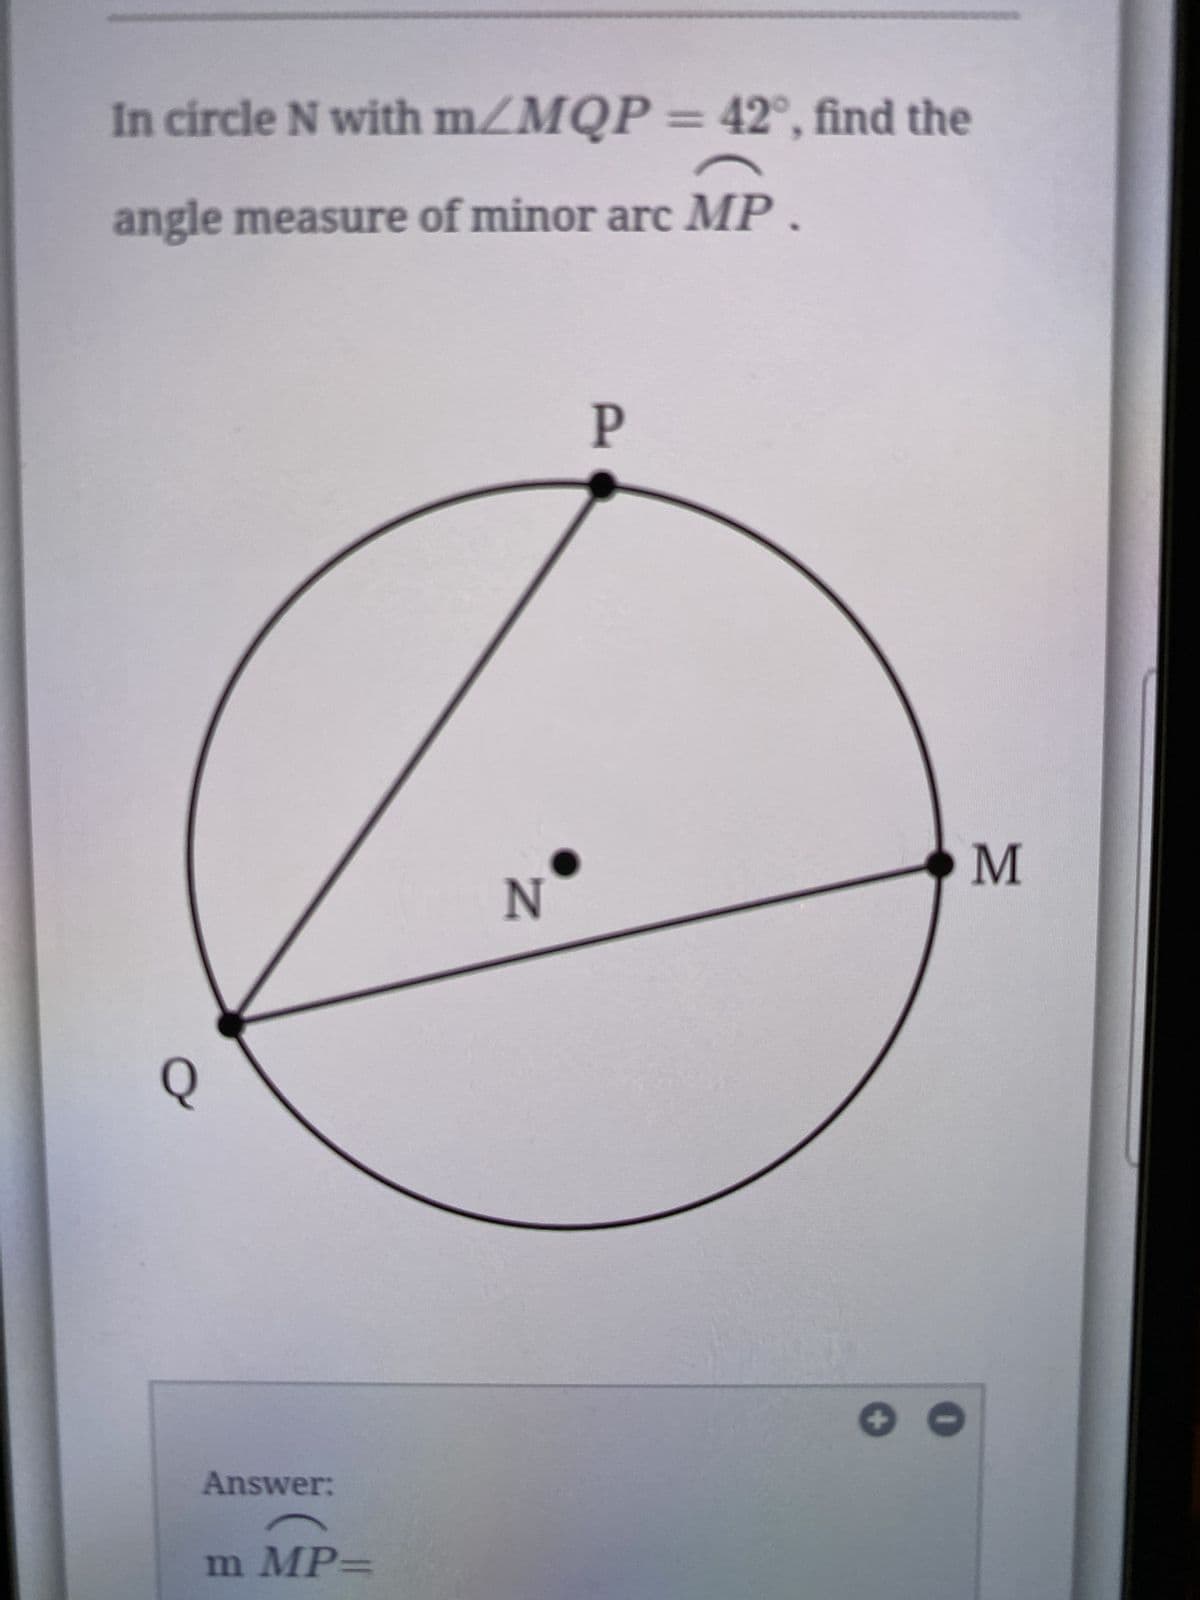 In circle N with m/MQP = 42°, find the
angle measure of minor arc MP
P
Q
Answer:
m MP=
N
M